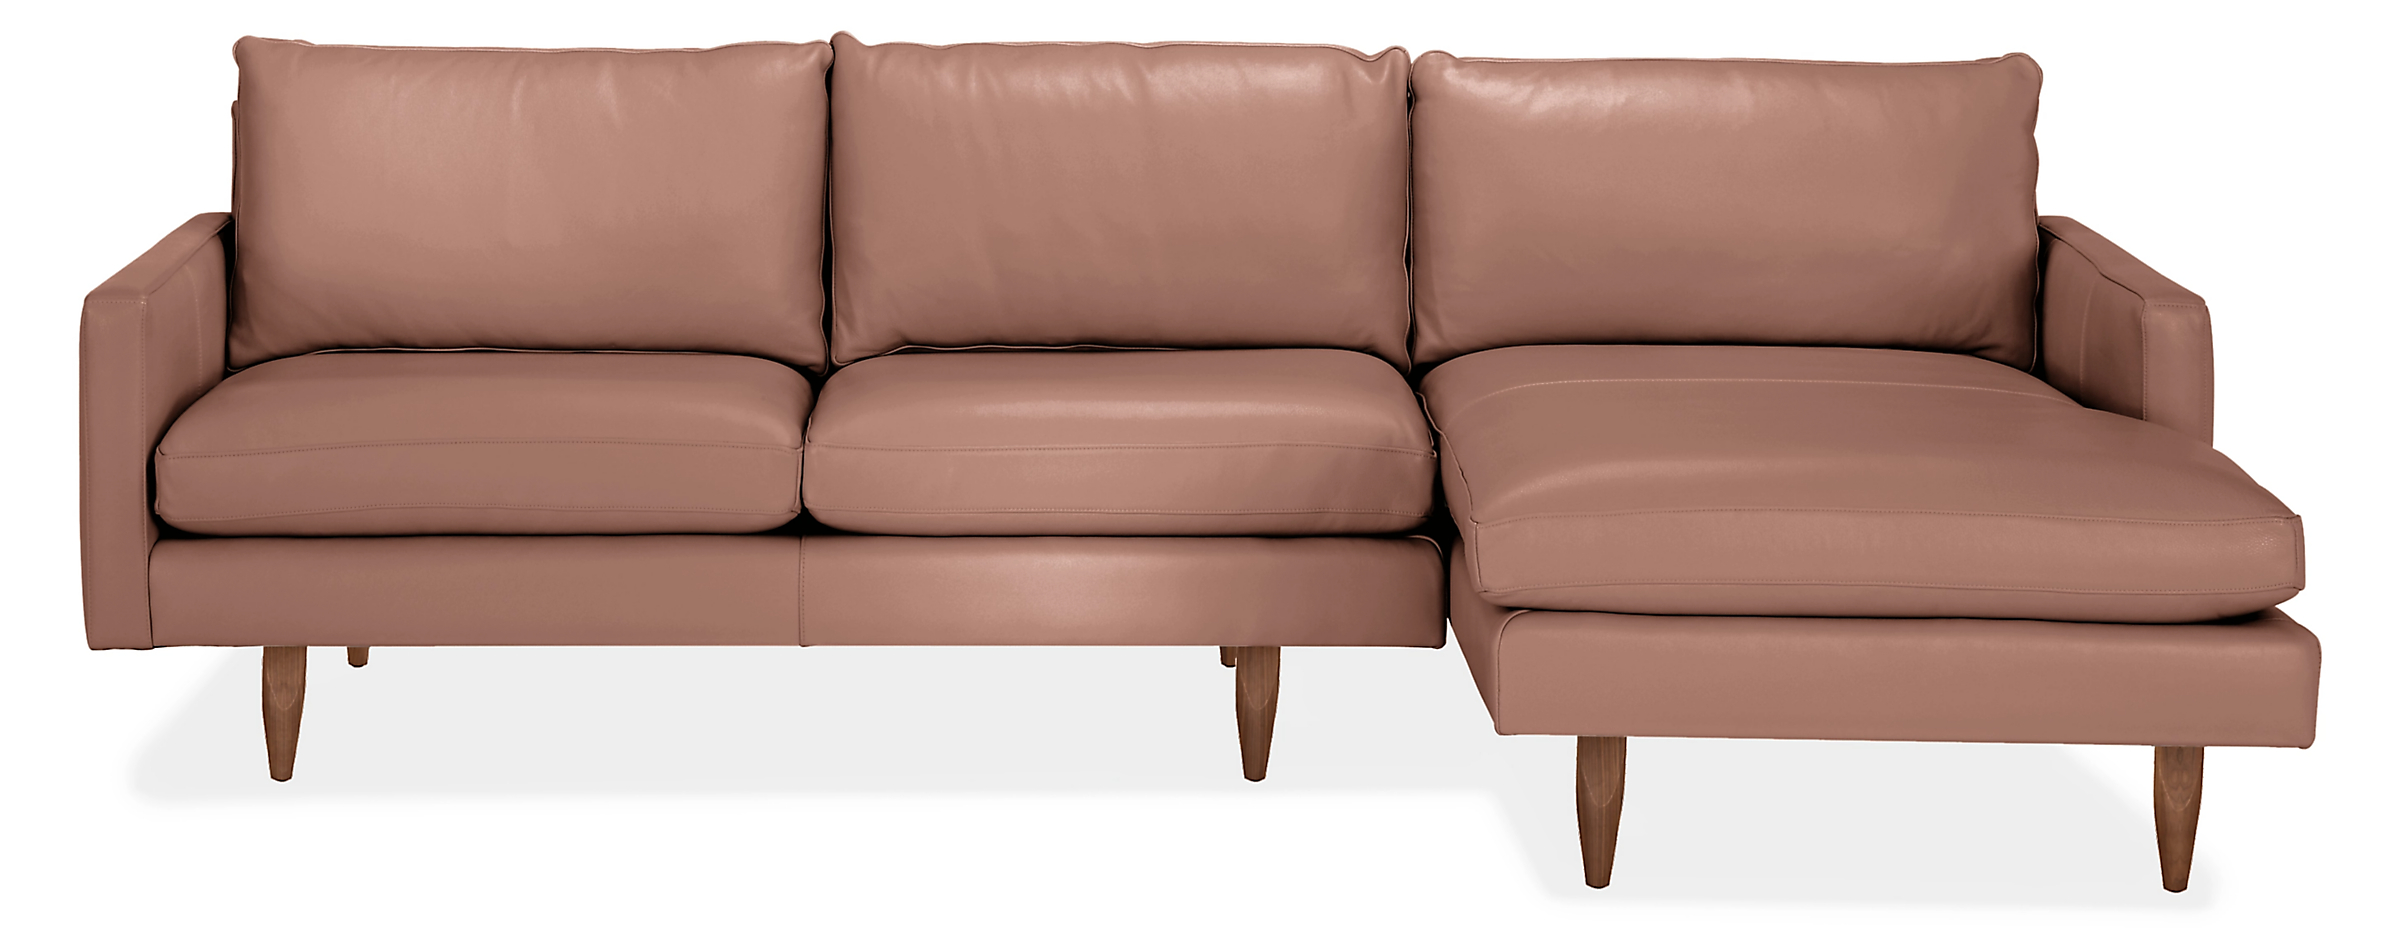 Jasper 104" Sofa with Right-Arm Chaise in Vento Rosewood Leather w/Walnut Legs